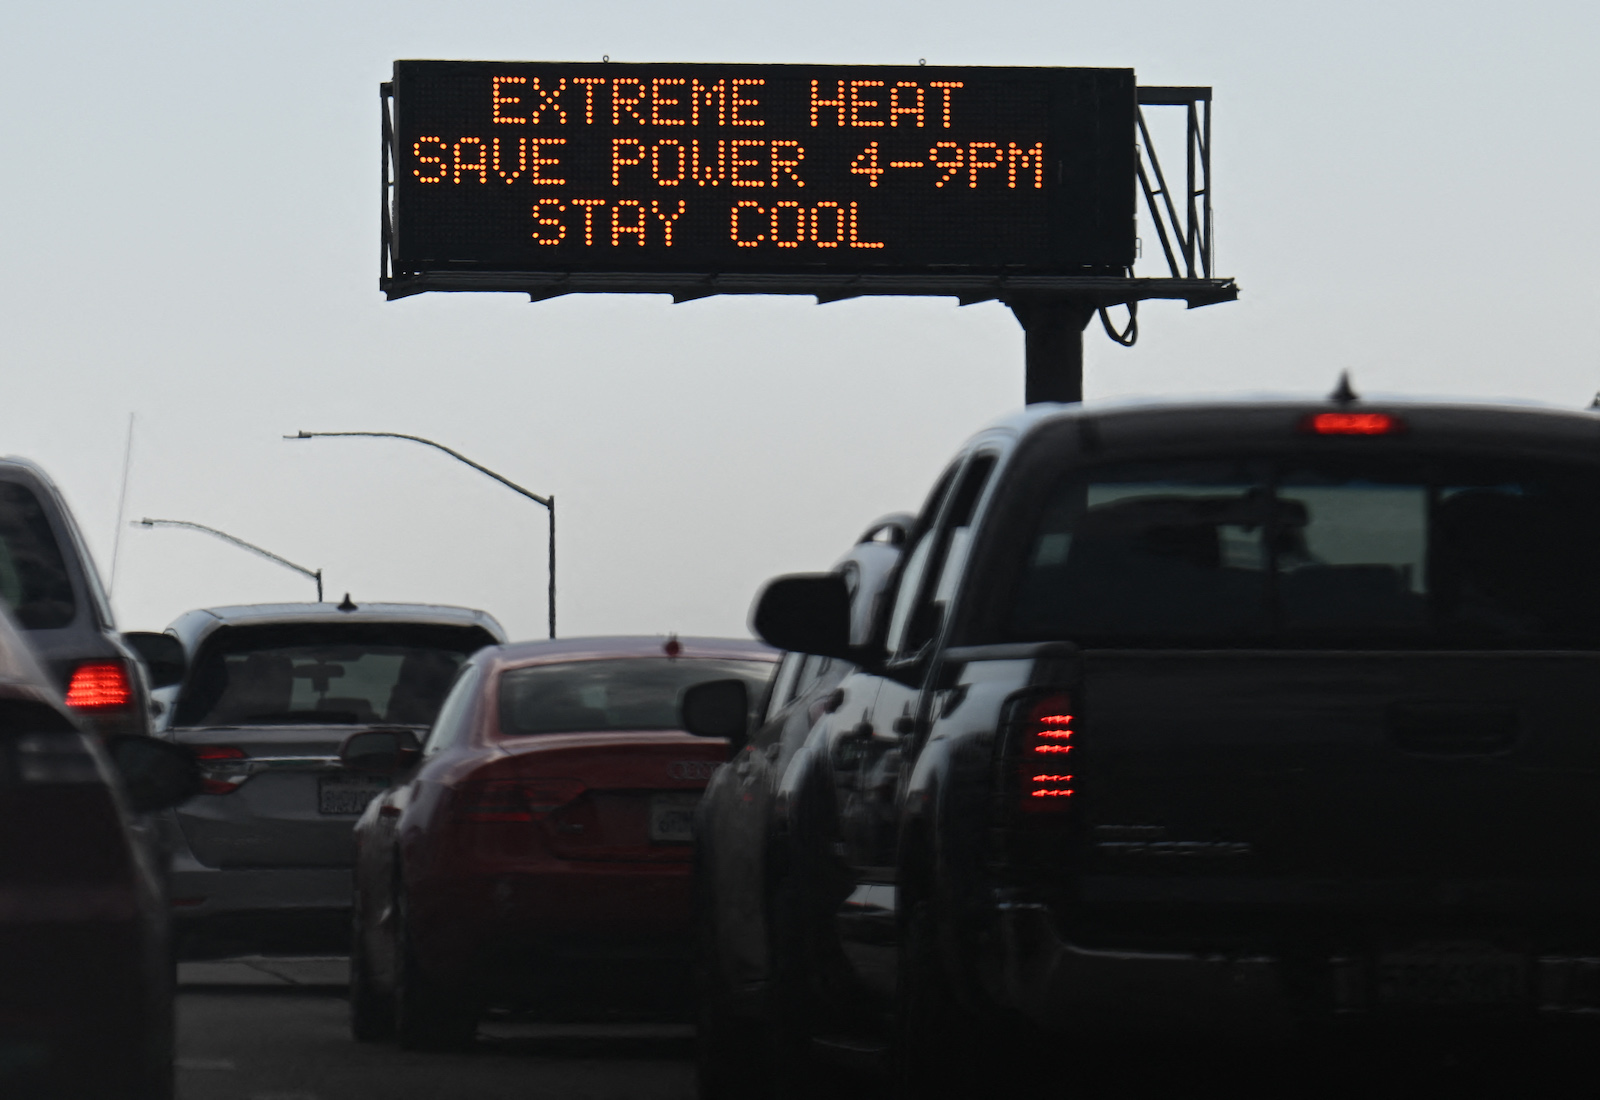 Cars drive past sign reading "Extreme heat, save power 4-9pm, stay cool."